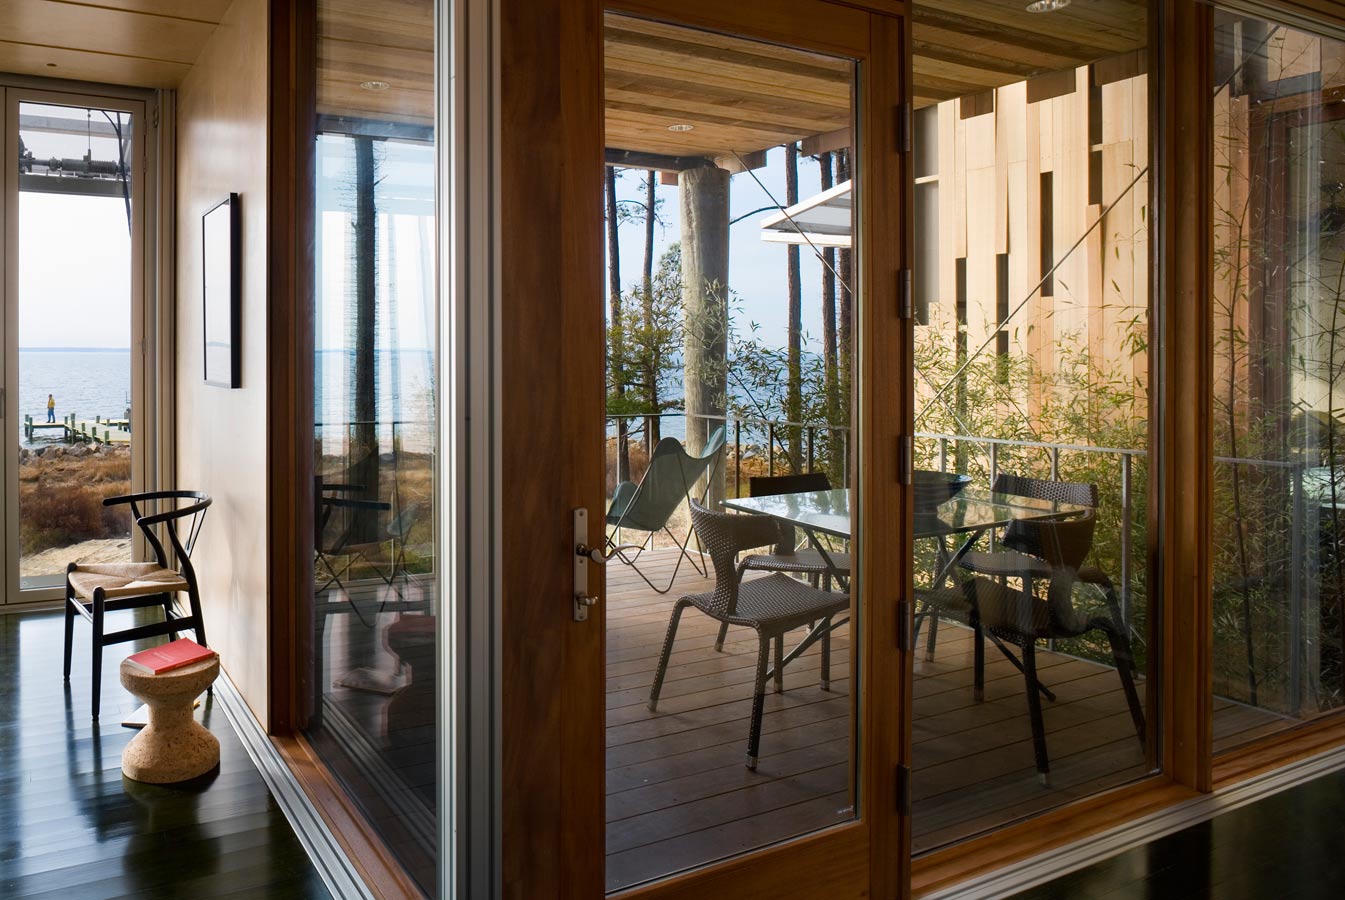 <p>The covered deck outside the master bedroom, with bamboo garden and guest wing beyond. <br><small>&copy; Peter Aaron/OTTO</small></p>